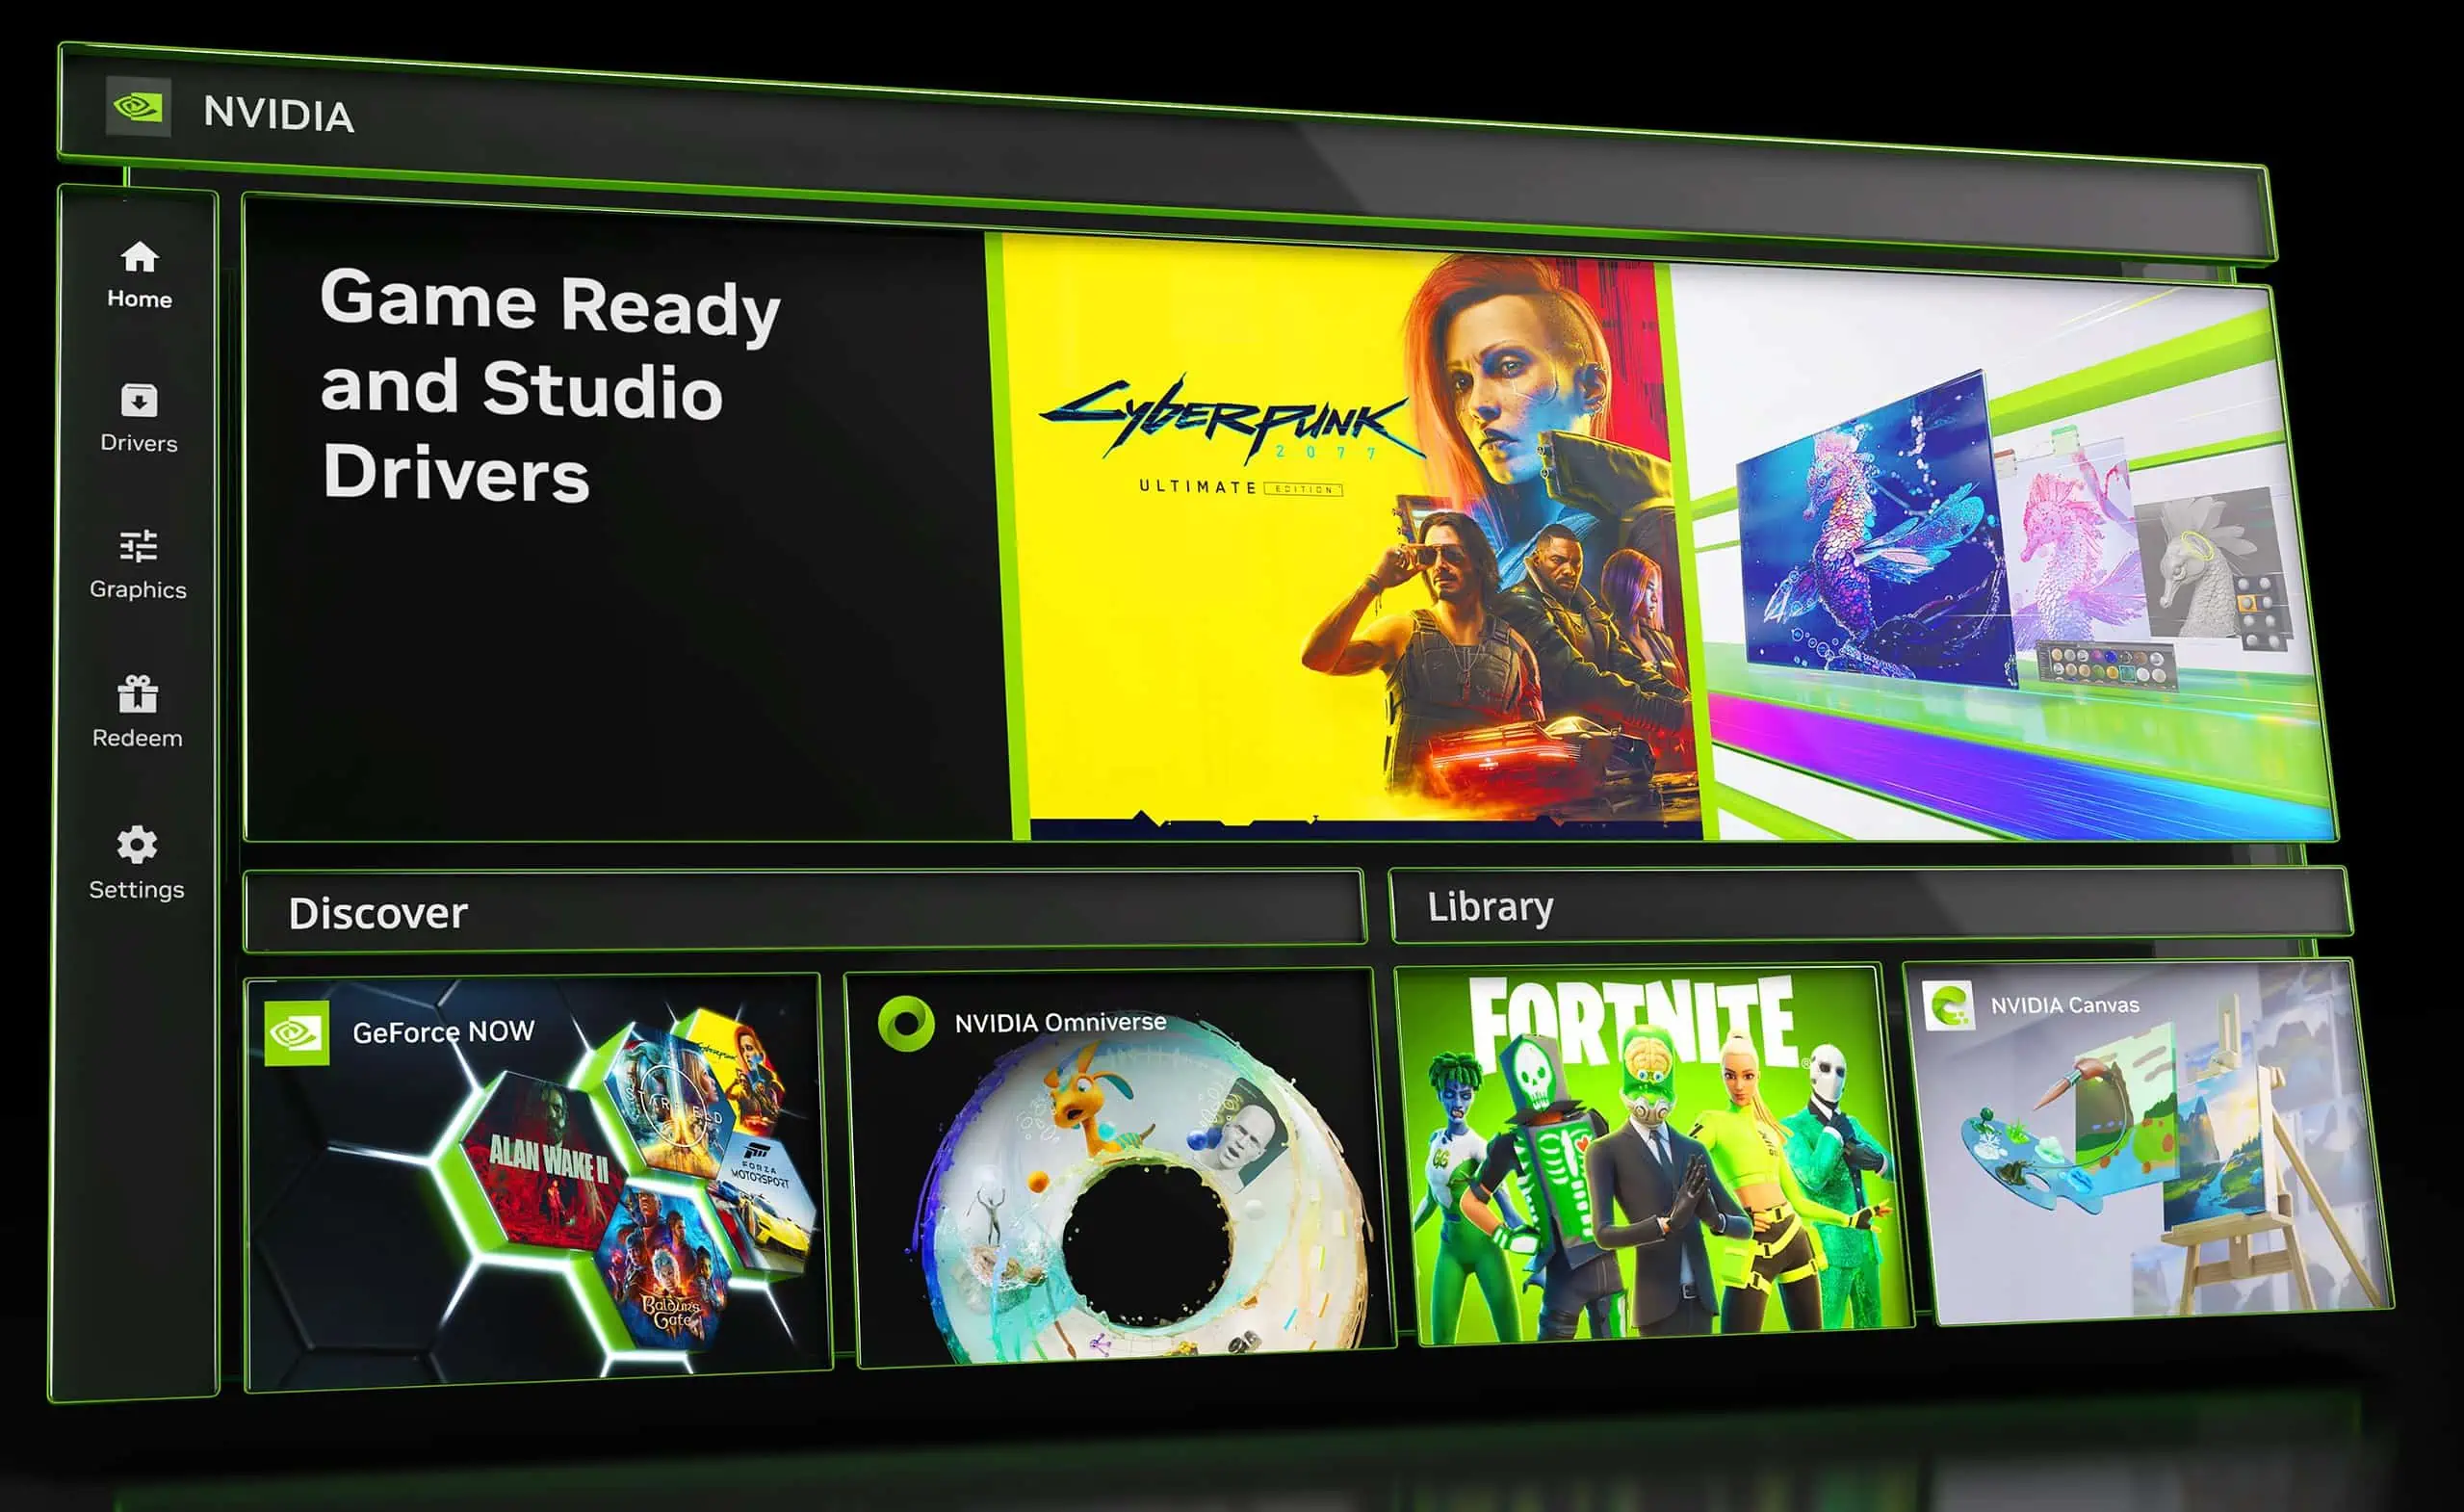 NVIDIA announces a new app to unify the NVIDIA Control Panel, GeForce Experience, and RTX Experience apps